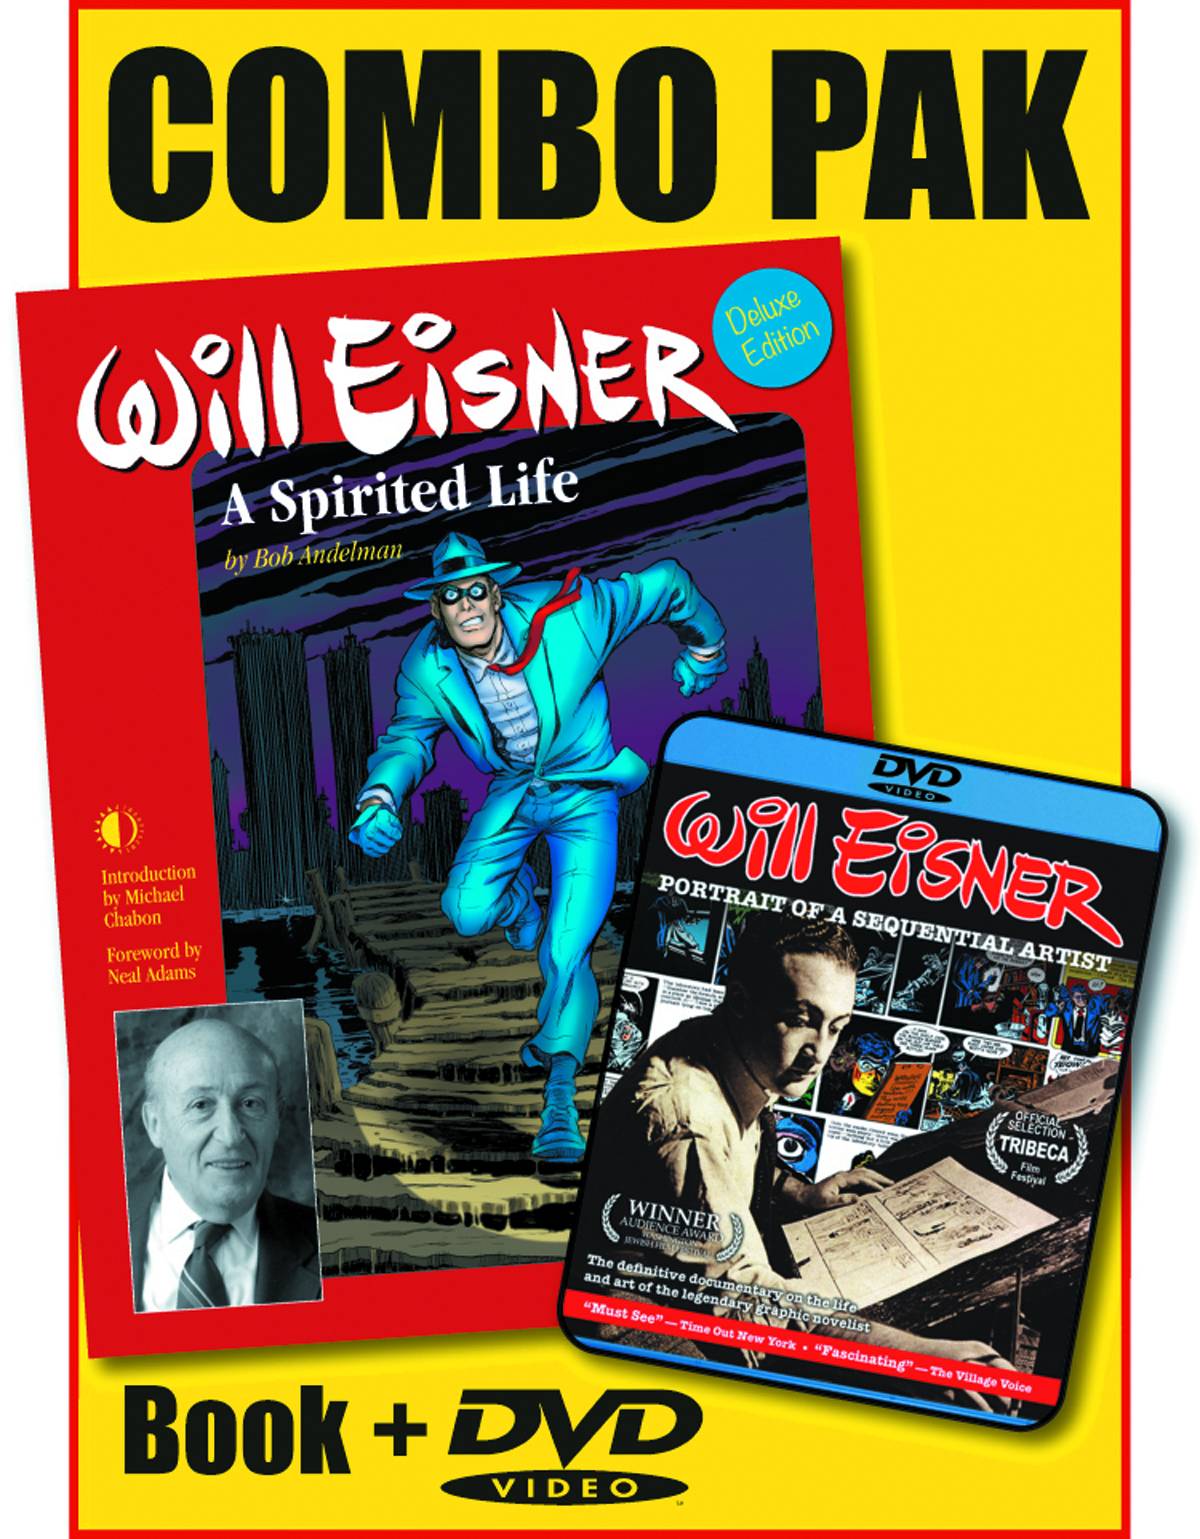 Will Eisner: A Spirited Life and Will Eisner: Portrait of a Sequential Artist book/DVD combo package